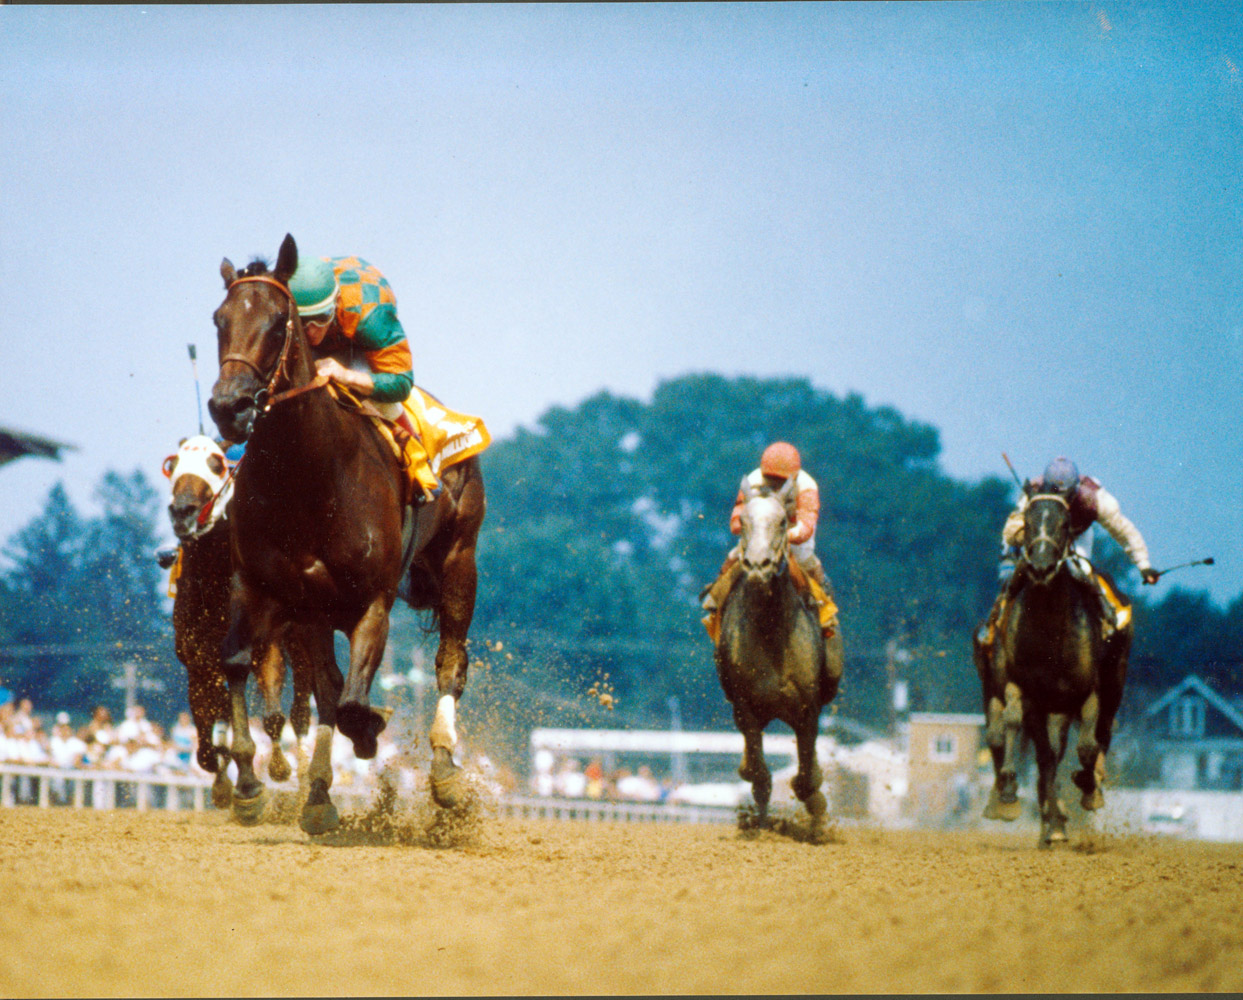 Safely Kept won the Genuine Risk Handicap, Maryland Million Distaff Handicap, and the Garden State Stakes Handicap three times each in her career (NYRA)